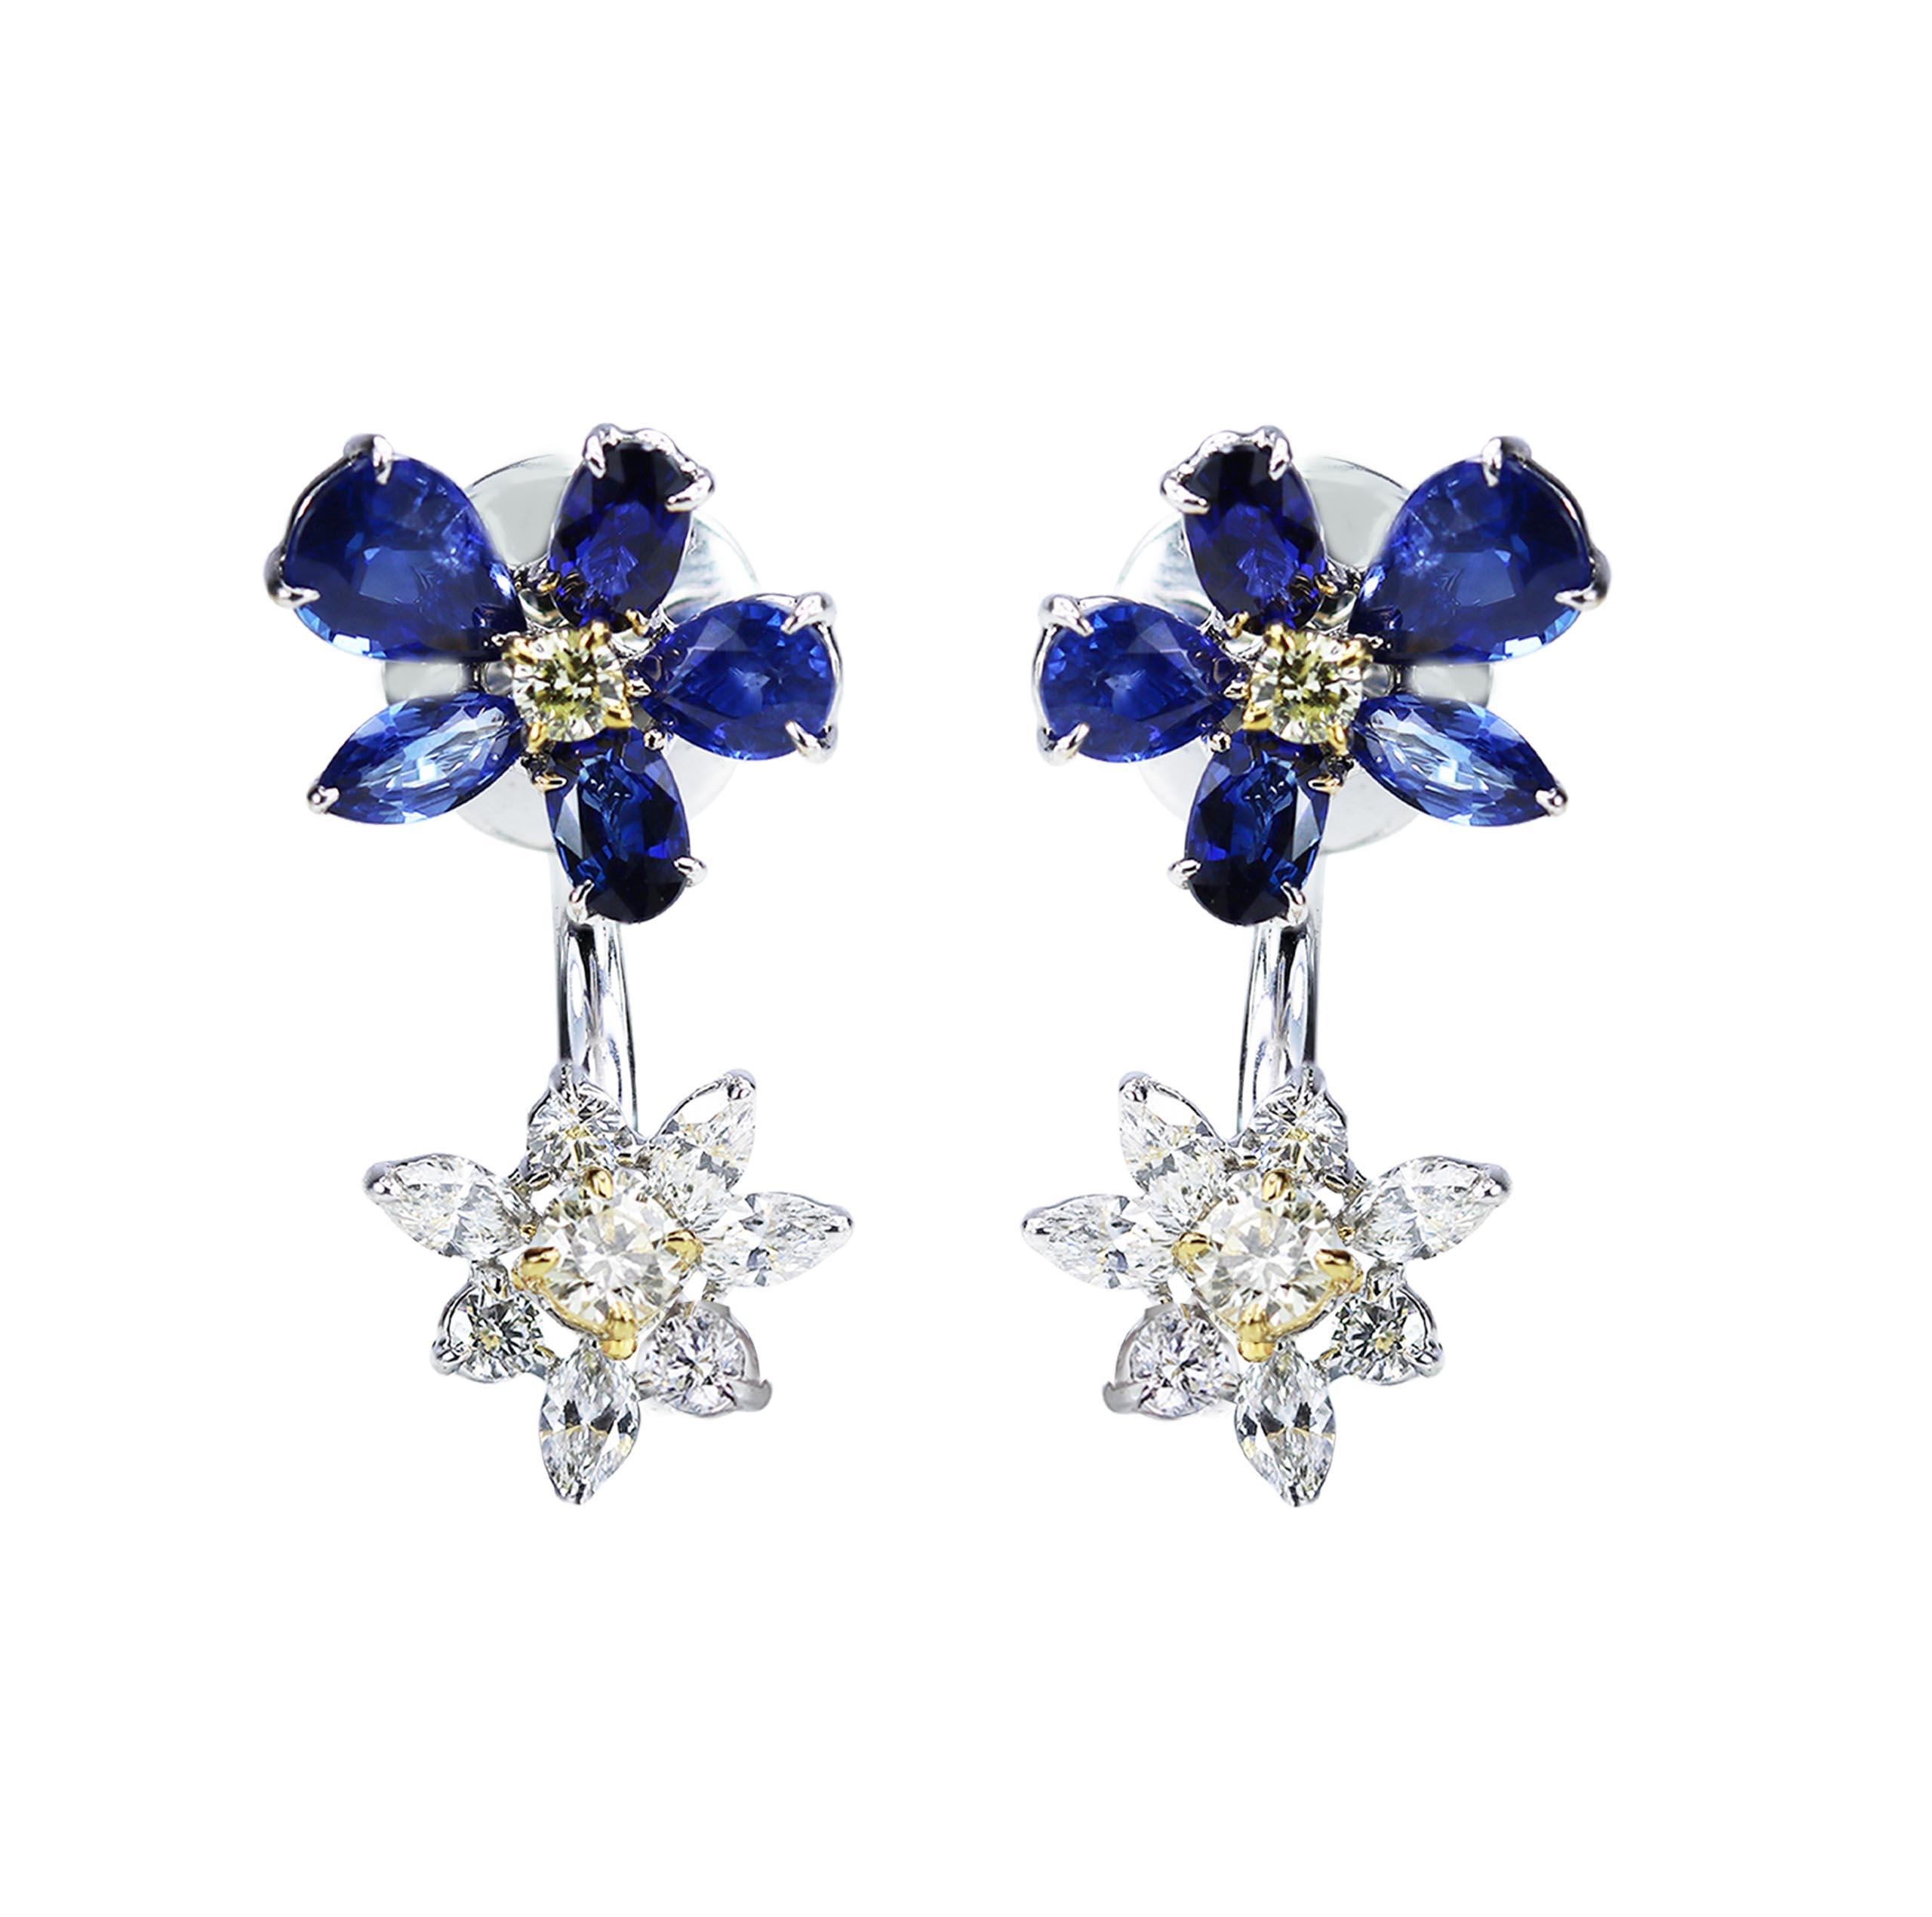 F-G/ VS-SI White and yellow diamonds, and blue sapphire earrings

We pay an ode to the timelessness of flowers but give it an unconventional update with these scintillating round and marquise full cut white and yellow diamond earrings which are